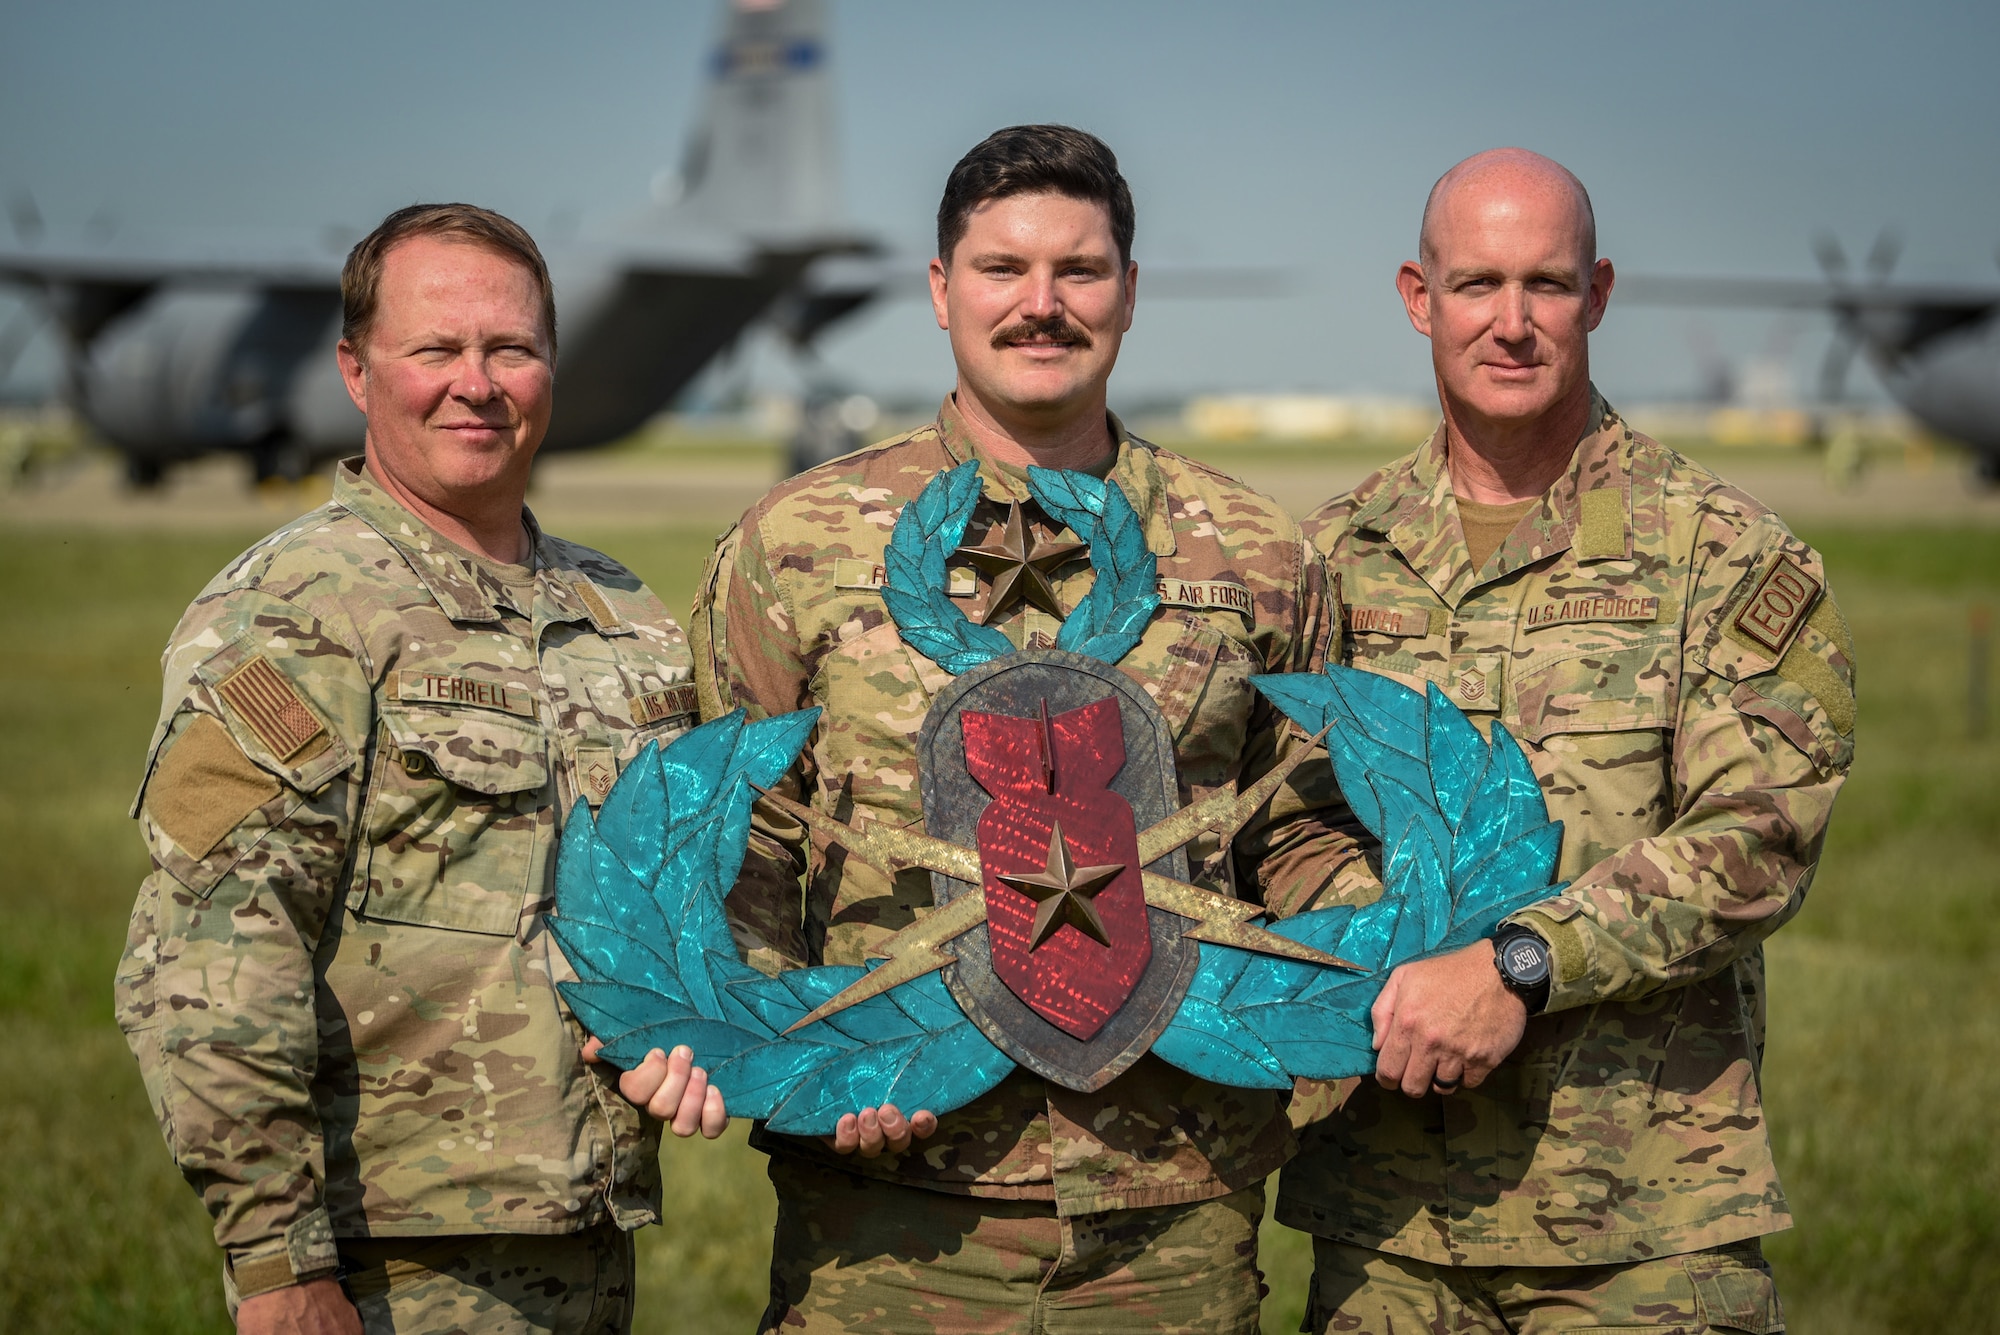 Master Sgt. Christopher R. Terrell (left), Senior Airman John M. Forcht (center) and Master Sgt. Dustin J. Turner (right) from the Kentucky Air National Guard's 123rd Explosive Ordnance Disposal Flight have been awaded Master Blaster of the Year for 2022. The honor recognizes an outstanding United States Air Force EOD Airman, noncommissioned officer and senior noncommissioned officer for their contributions to the unit, base, command and the EOD program. (U.S. Air National Guard photo by Tech. Sgt. Joshua Horton)